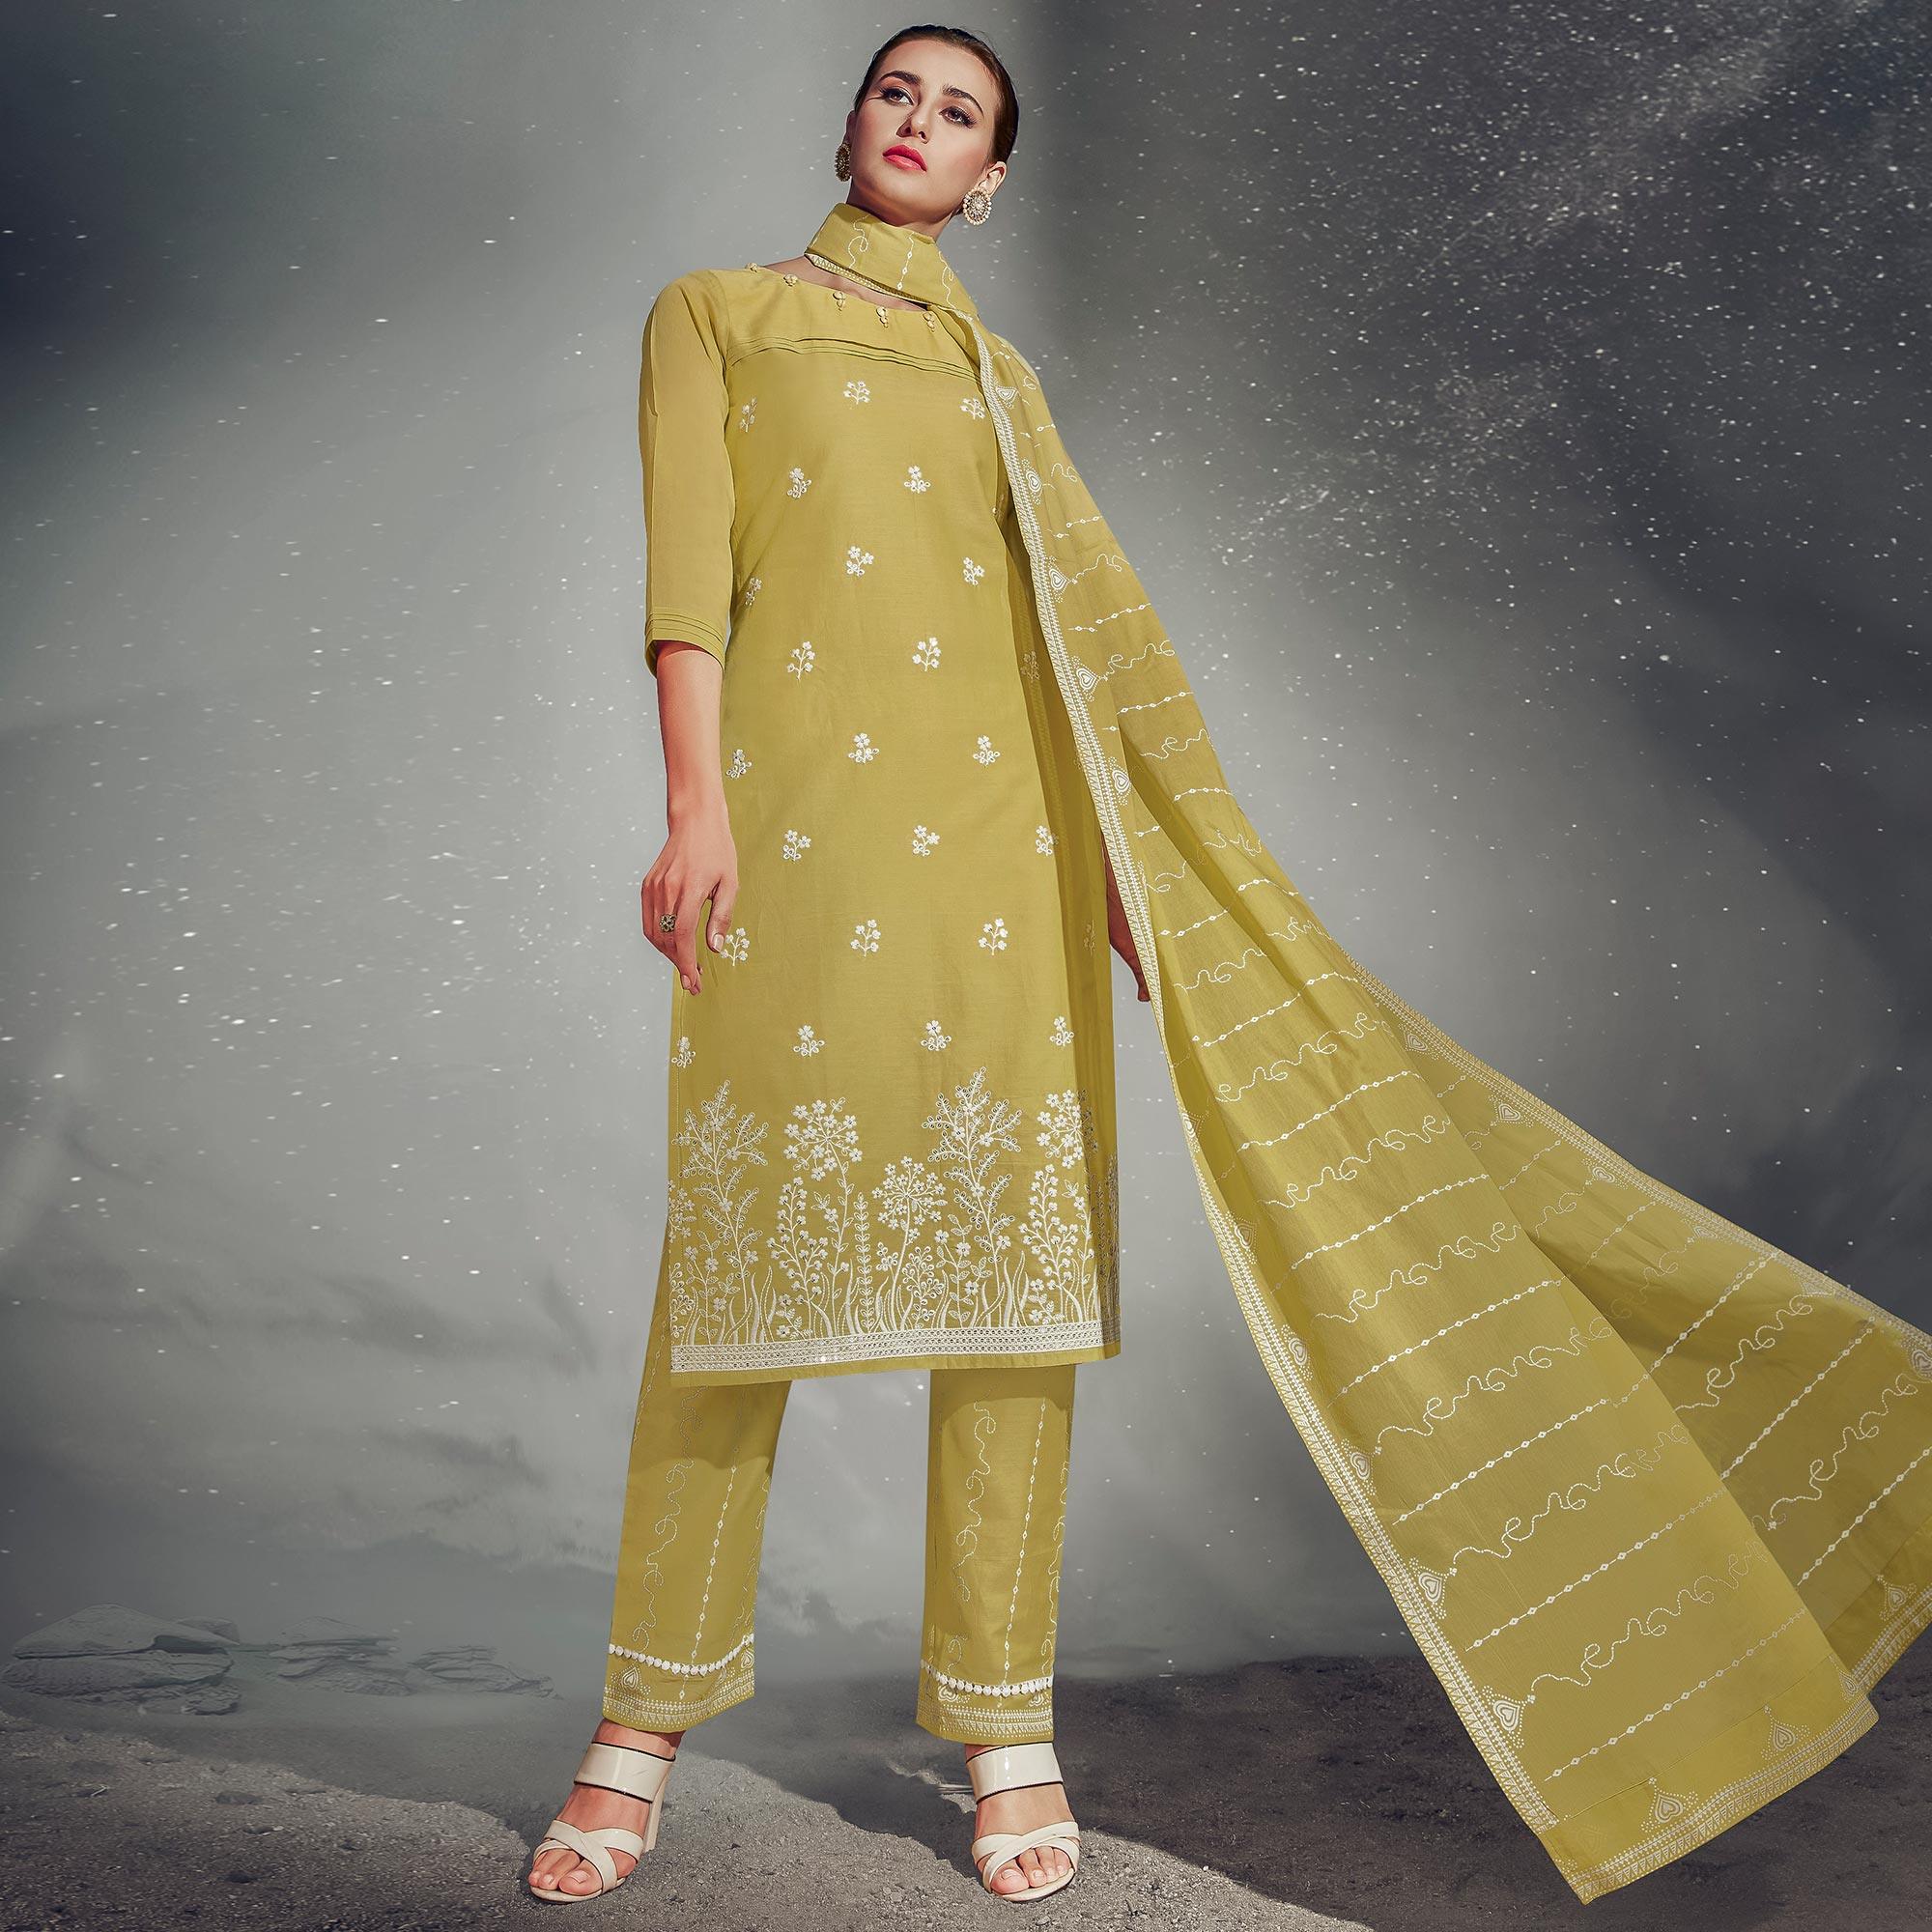 Eye-catching Olive Green Colored Partywear Embroidered Cotton Kurti-Pant Set With Dupatta - Peachmode